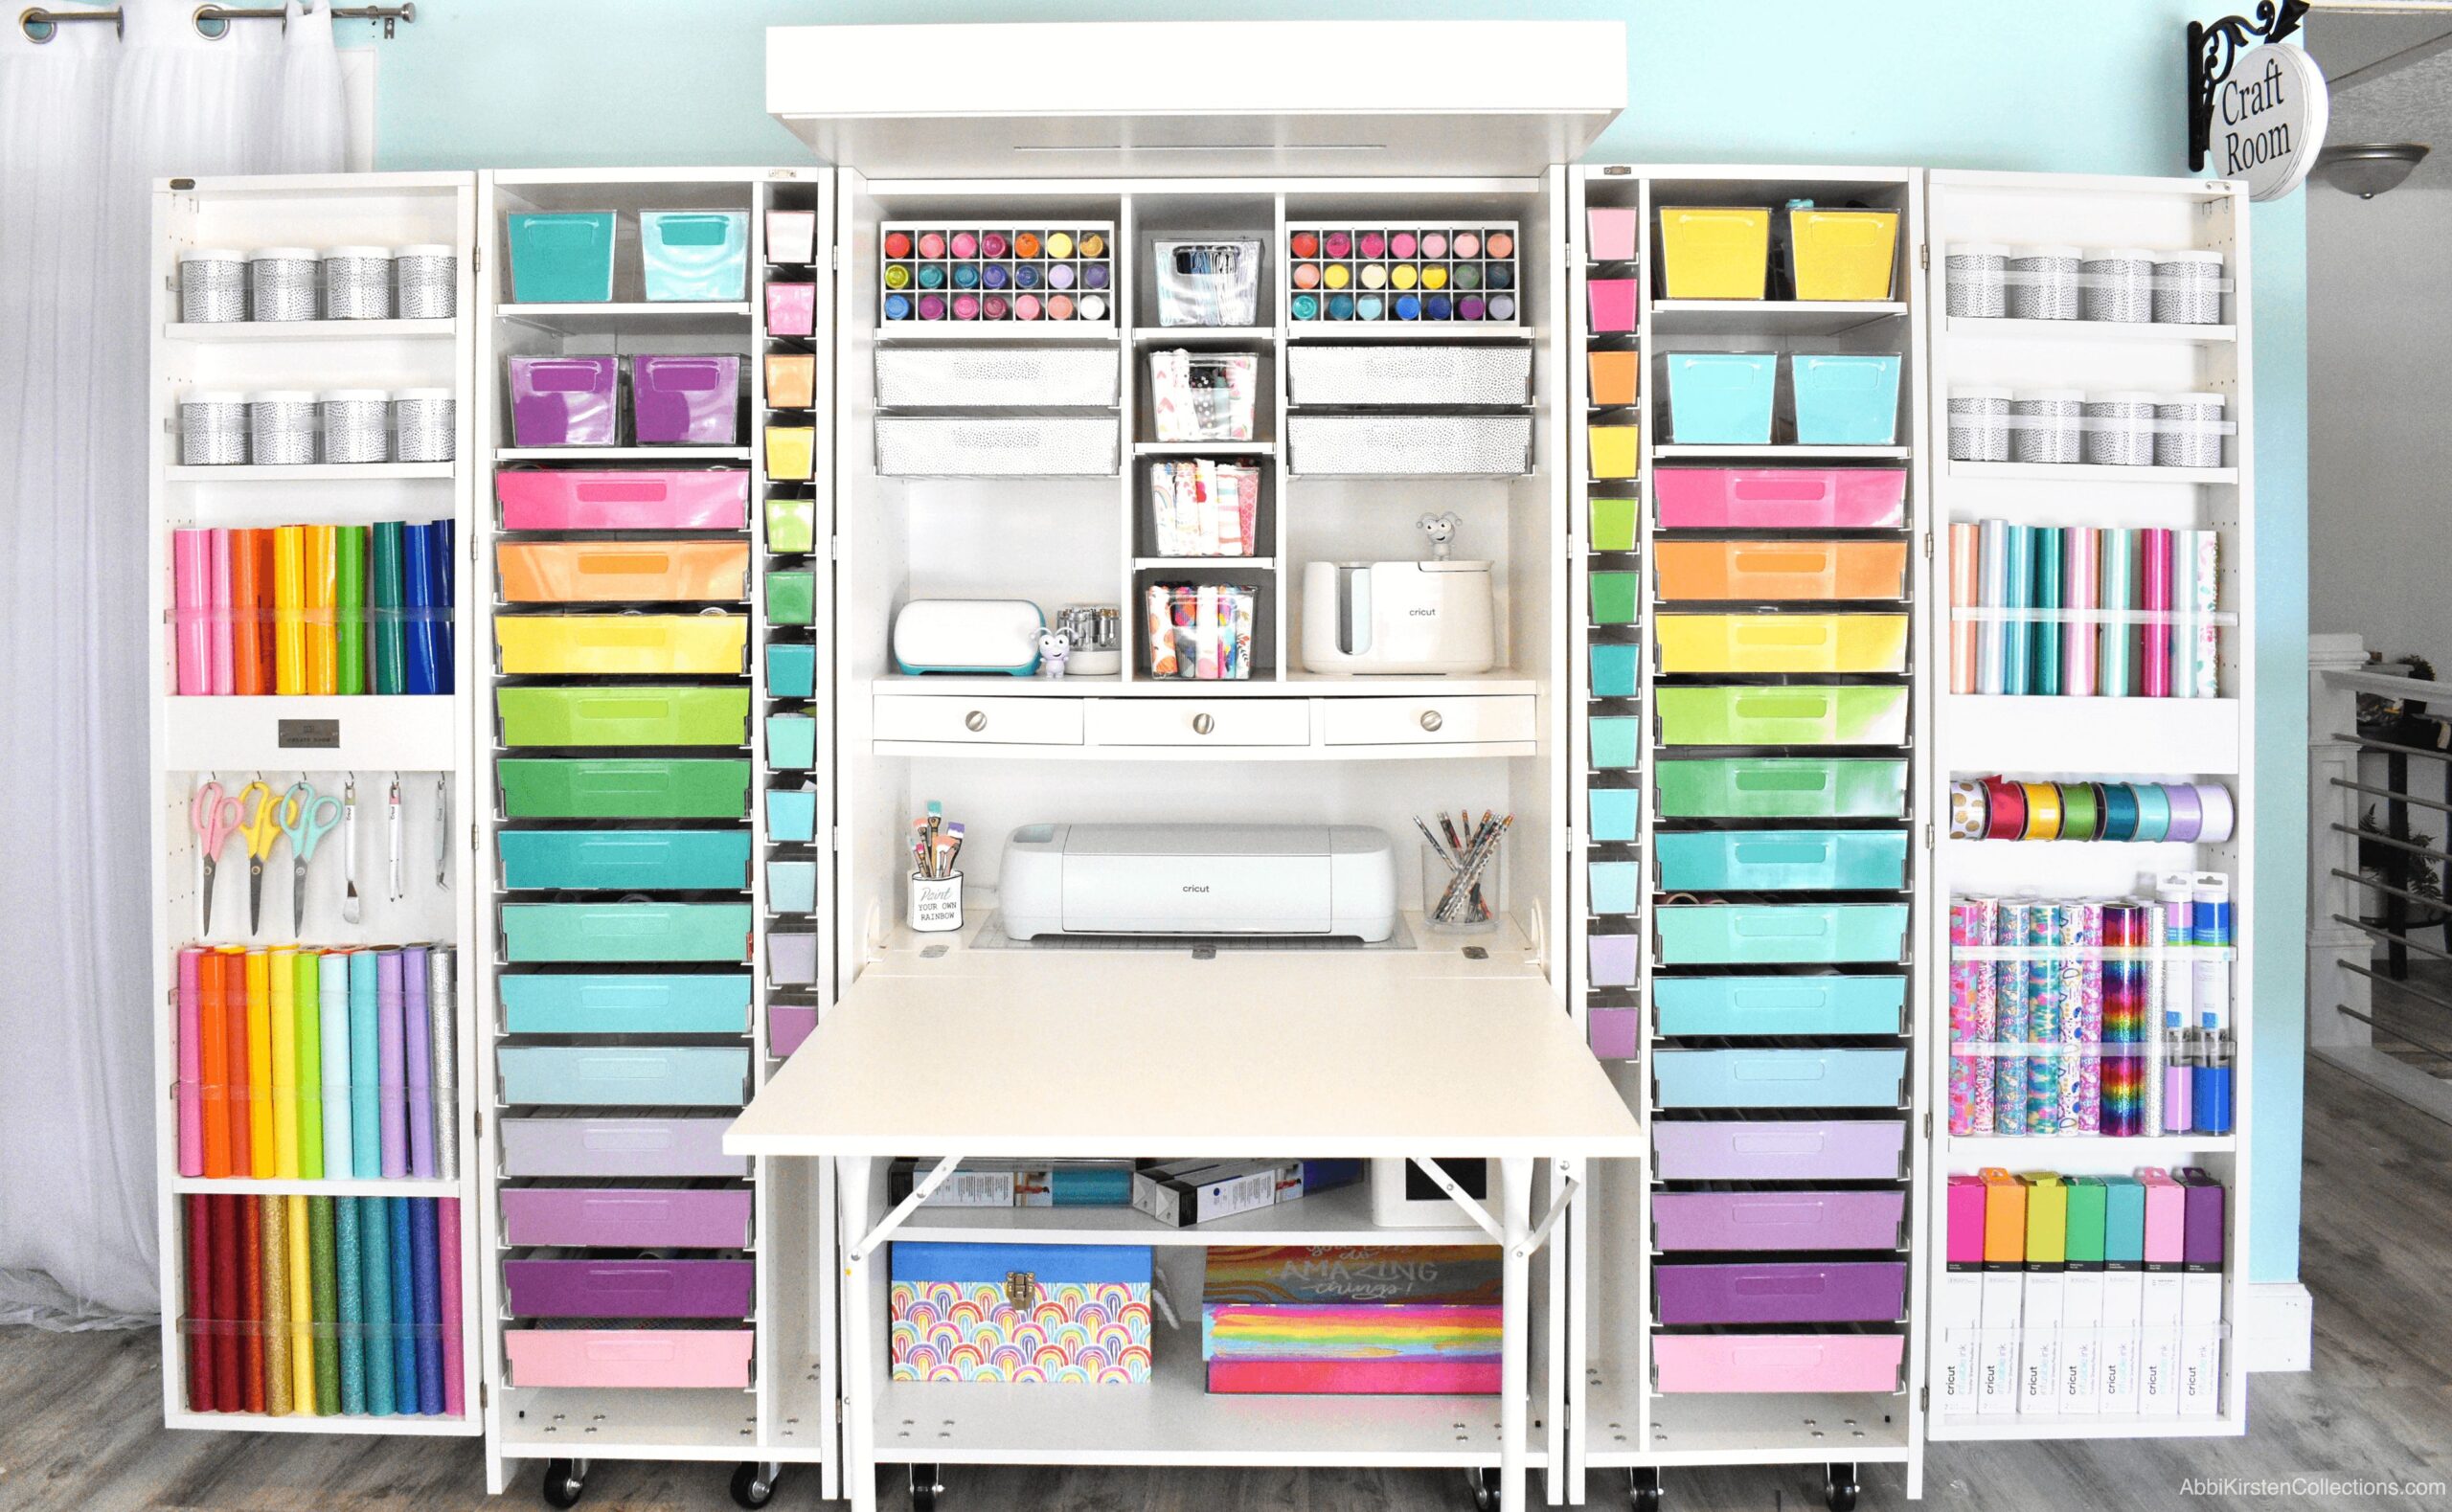 Dreambox Craft Room Storage Cabinet Review – Is a Dreambox Right For You?